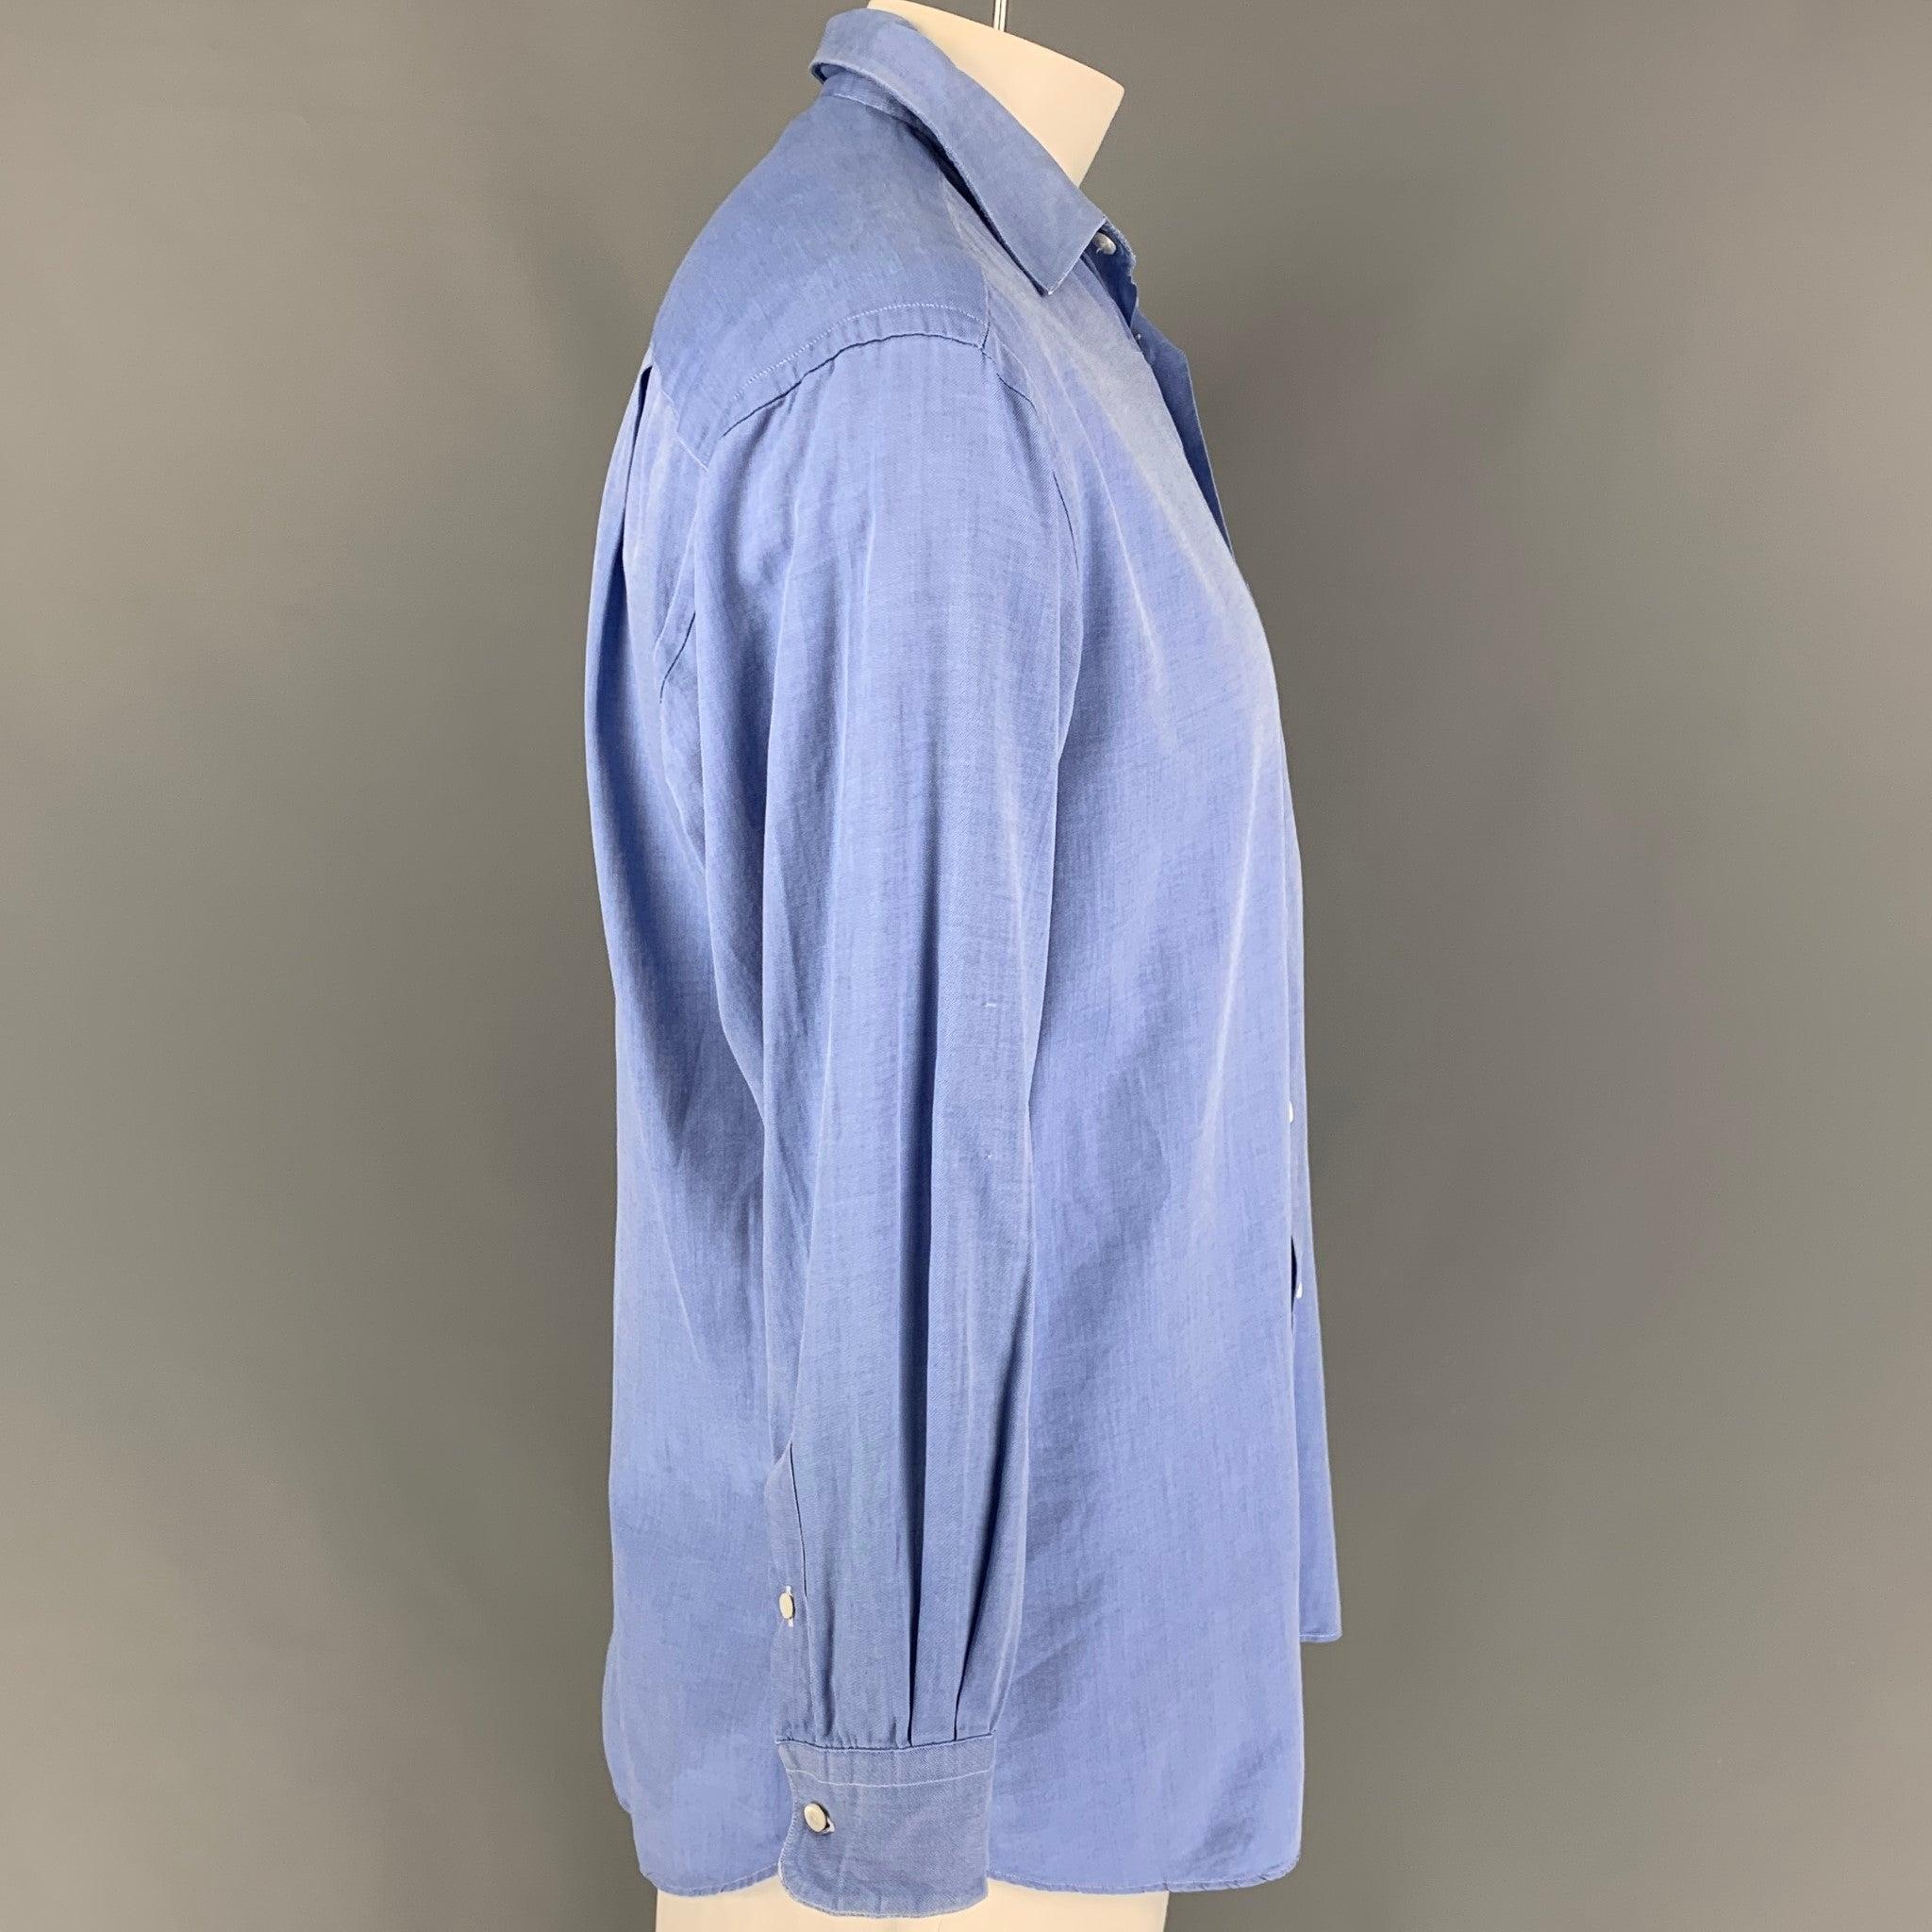 ERMENEGILDO ZEGNA long sleeve shirt comes in a blue cotton featuring a spread collar, front pocket, and a button up closure. Made in USA.
Very Good
Pre-Owned Condition. 

Marked:   41/16 

Measurements: 
 
Shoulder: 20 inches  Chest: 48 inches